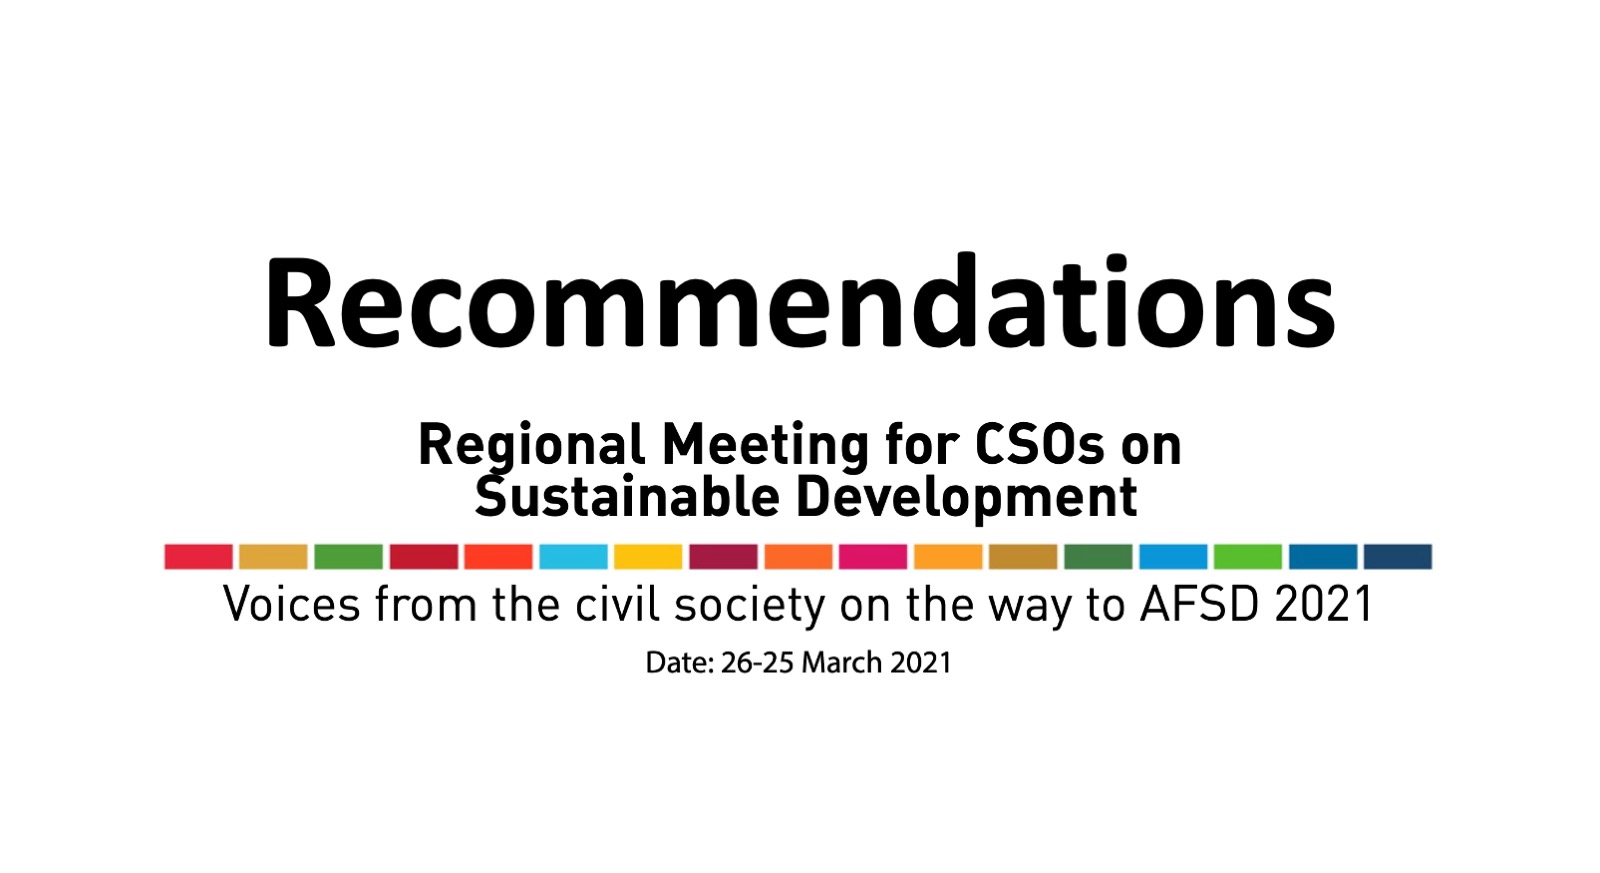 Recommendations: Civil Society Regional Meeting on Sustainable Development in the Arab Region